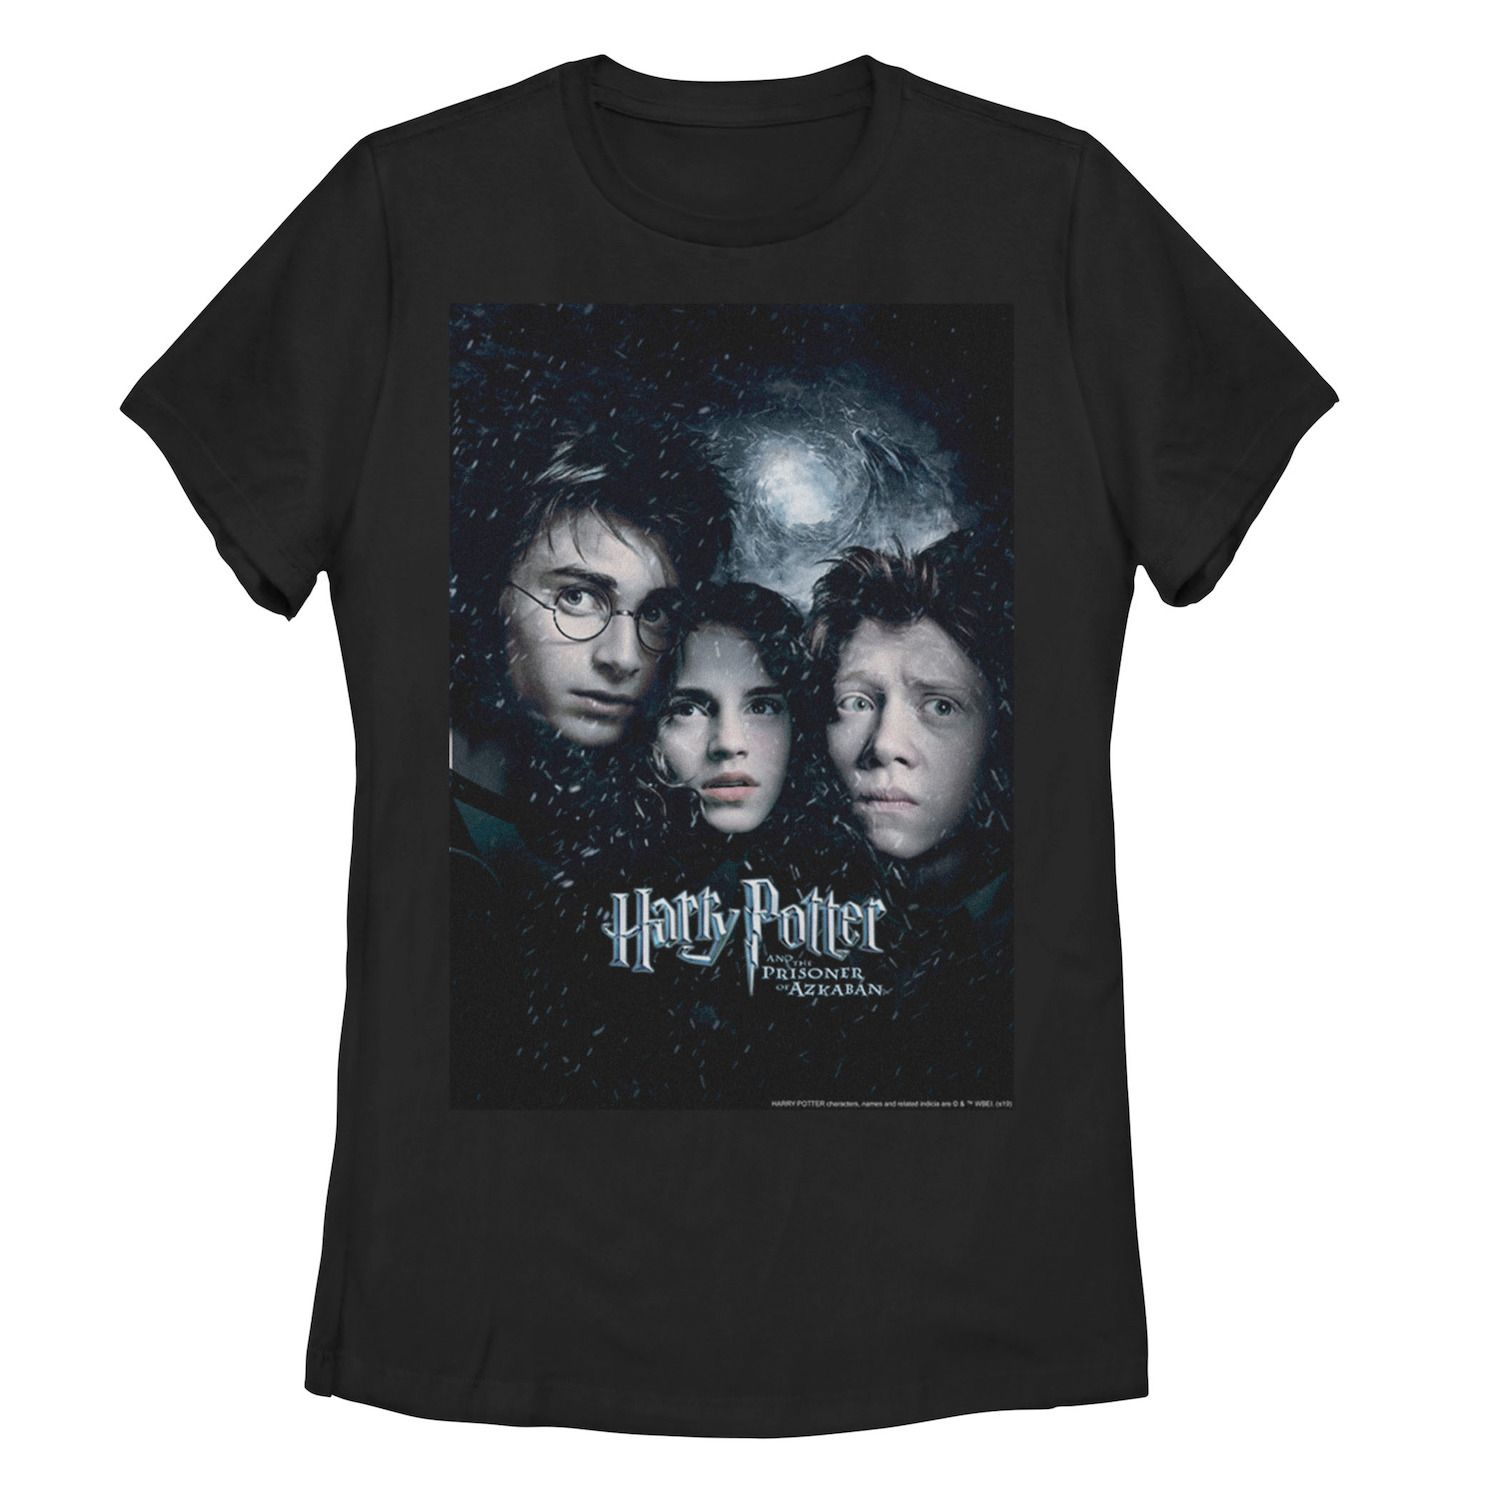 Image for Harry Potter Juniors' and the Prisoner of Azkaban Graphic Tee at Kohl's.